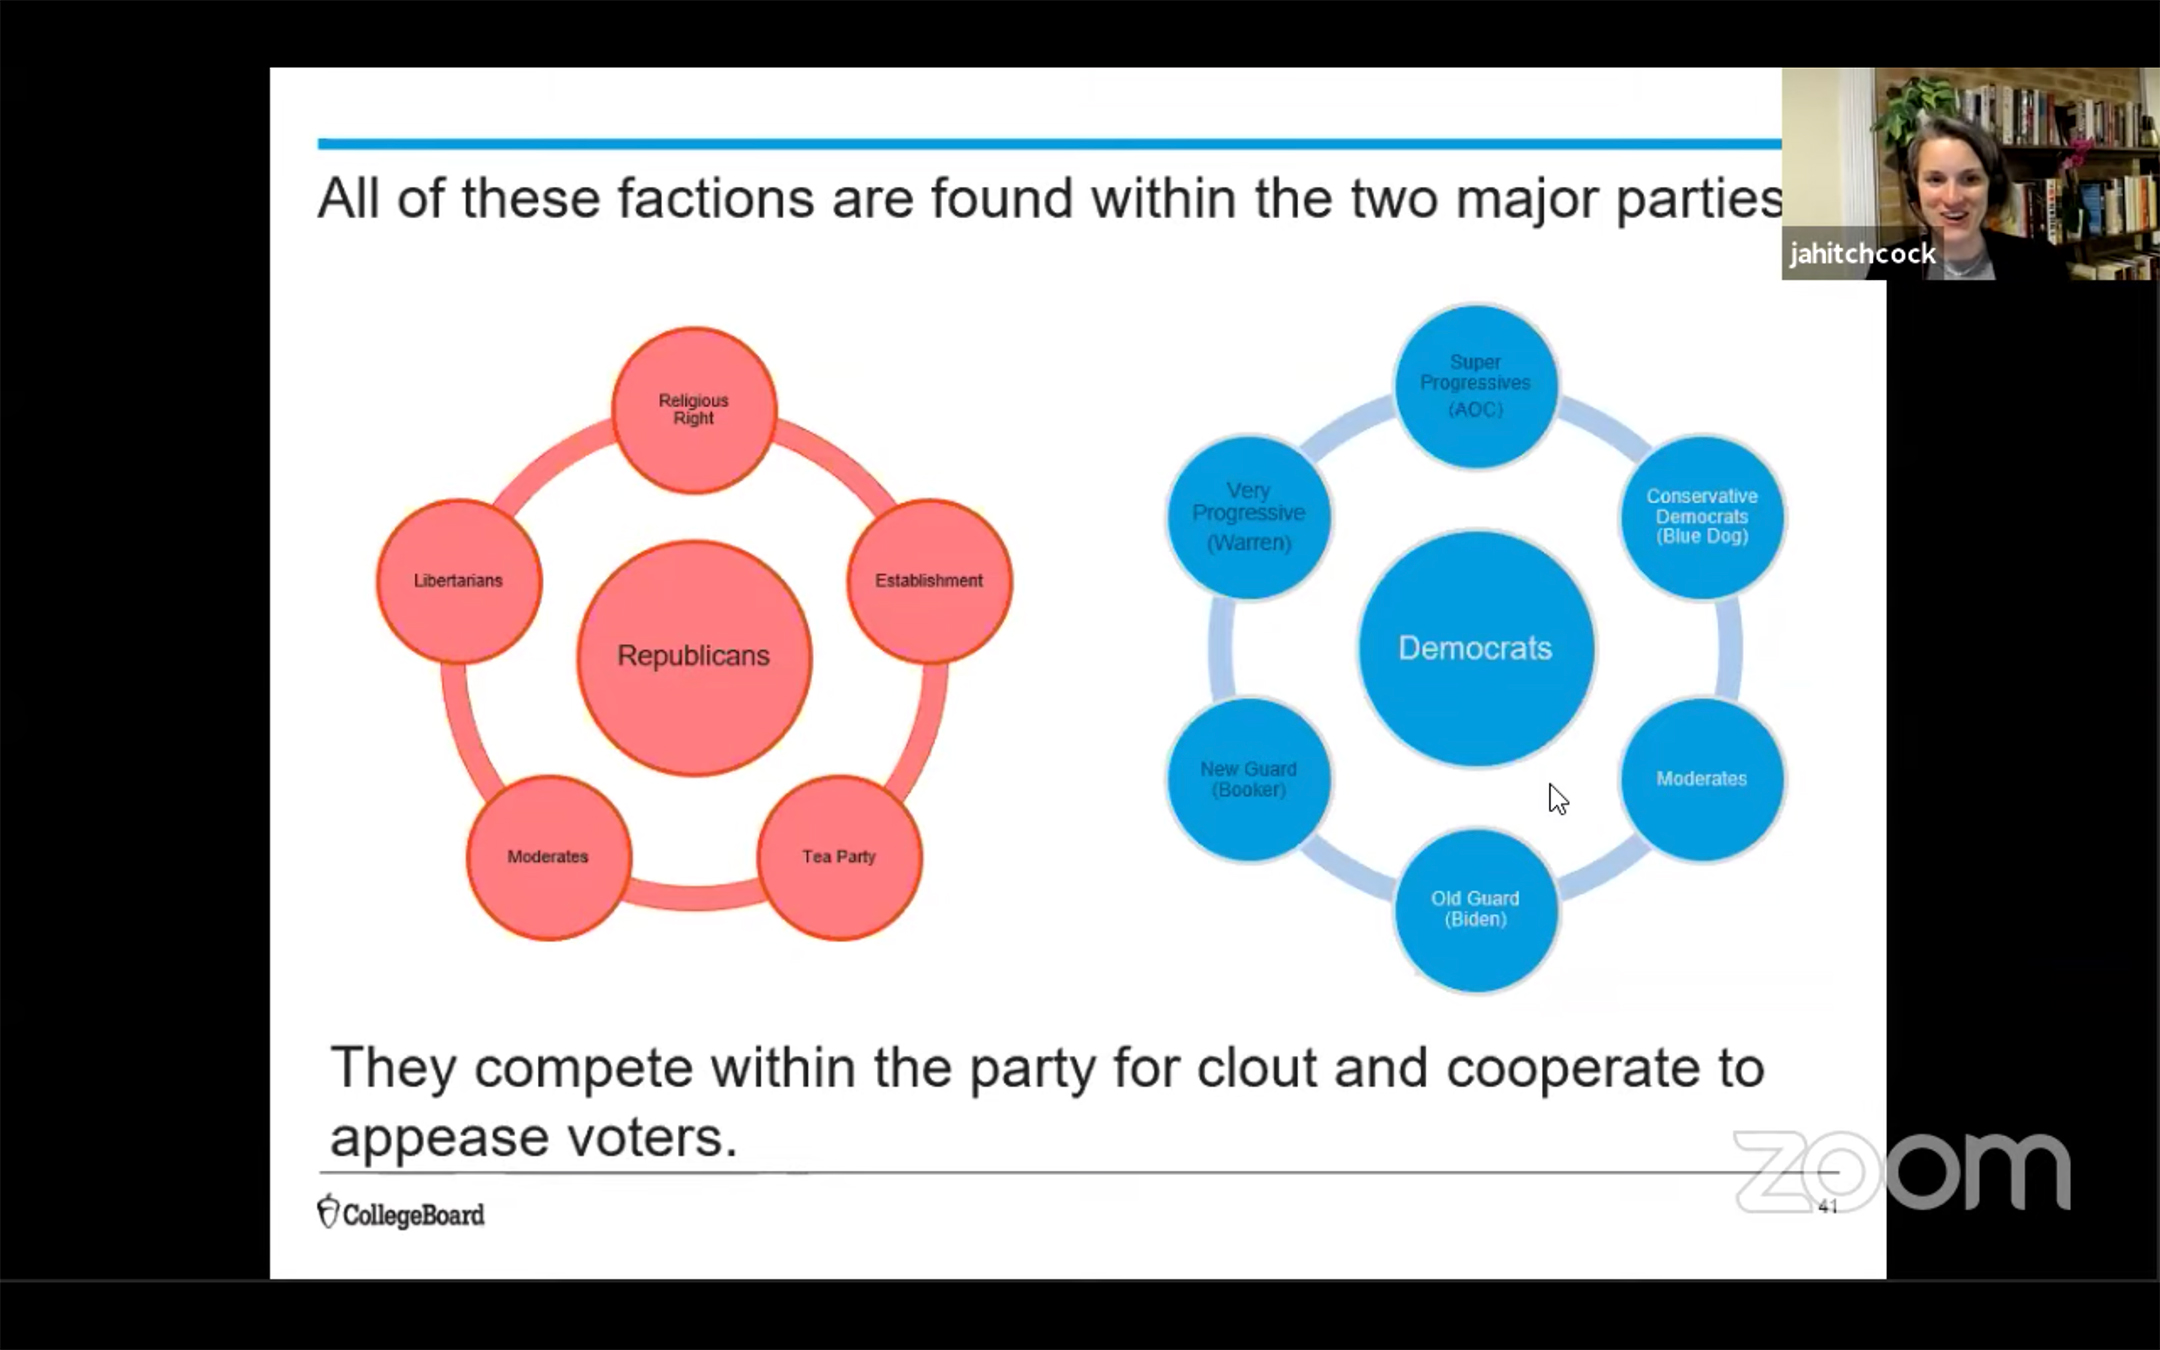 a screenshot from a virtual AP Government and Politics class about political parties showing a chart breaking down the factions found within the two major American political parties, with Republicans in red and Democrats in blue and the teacher in a small box at the top right